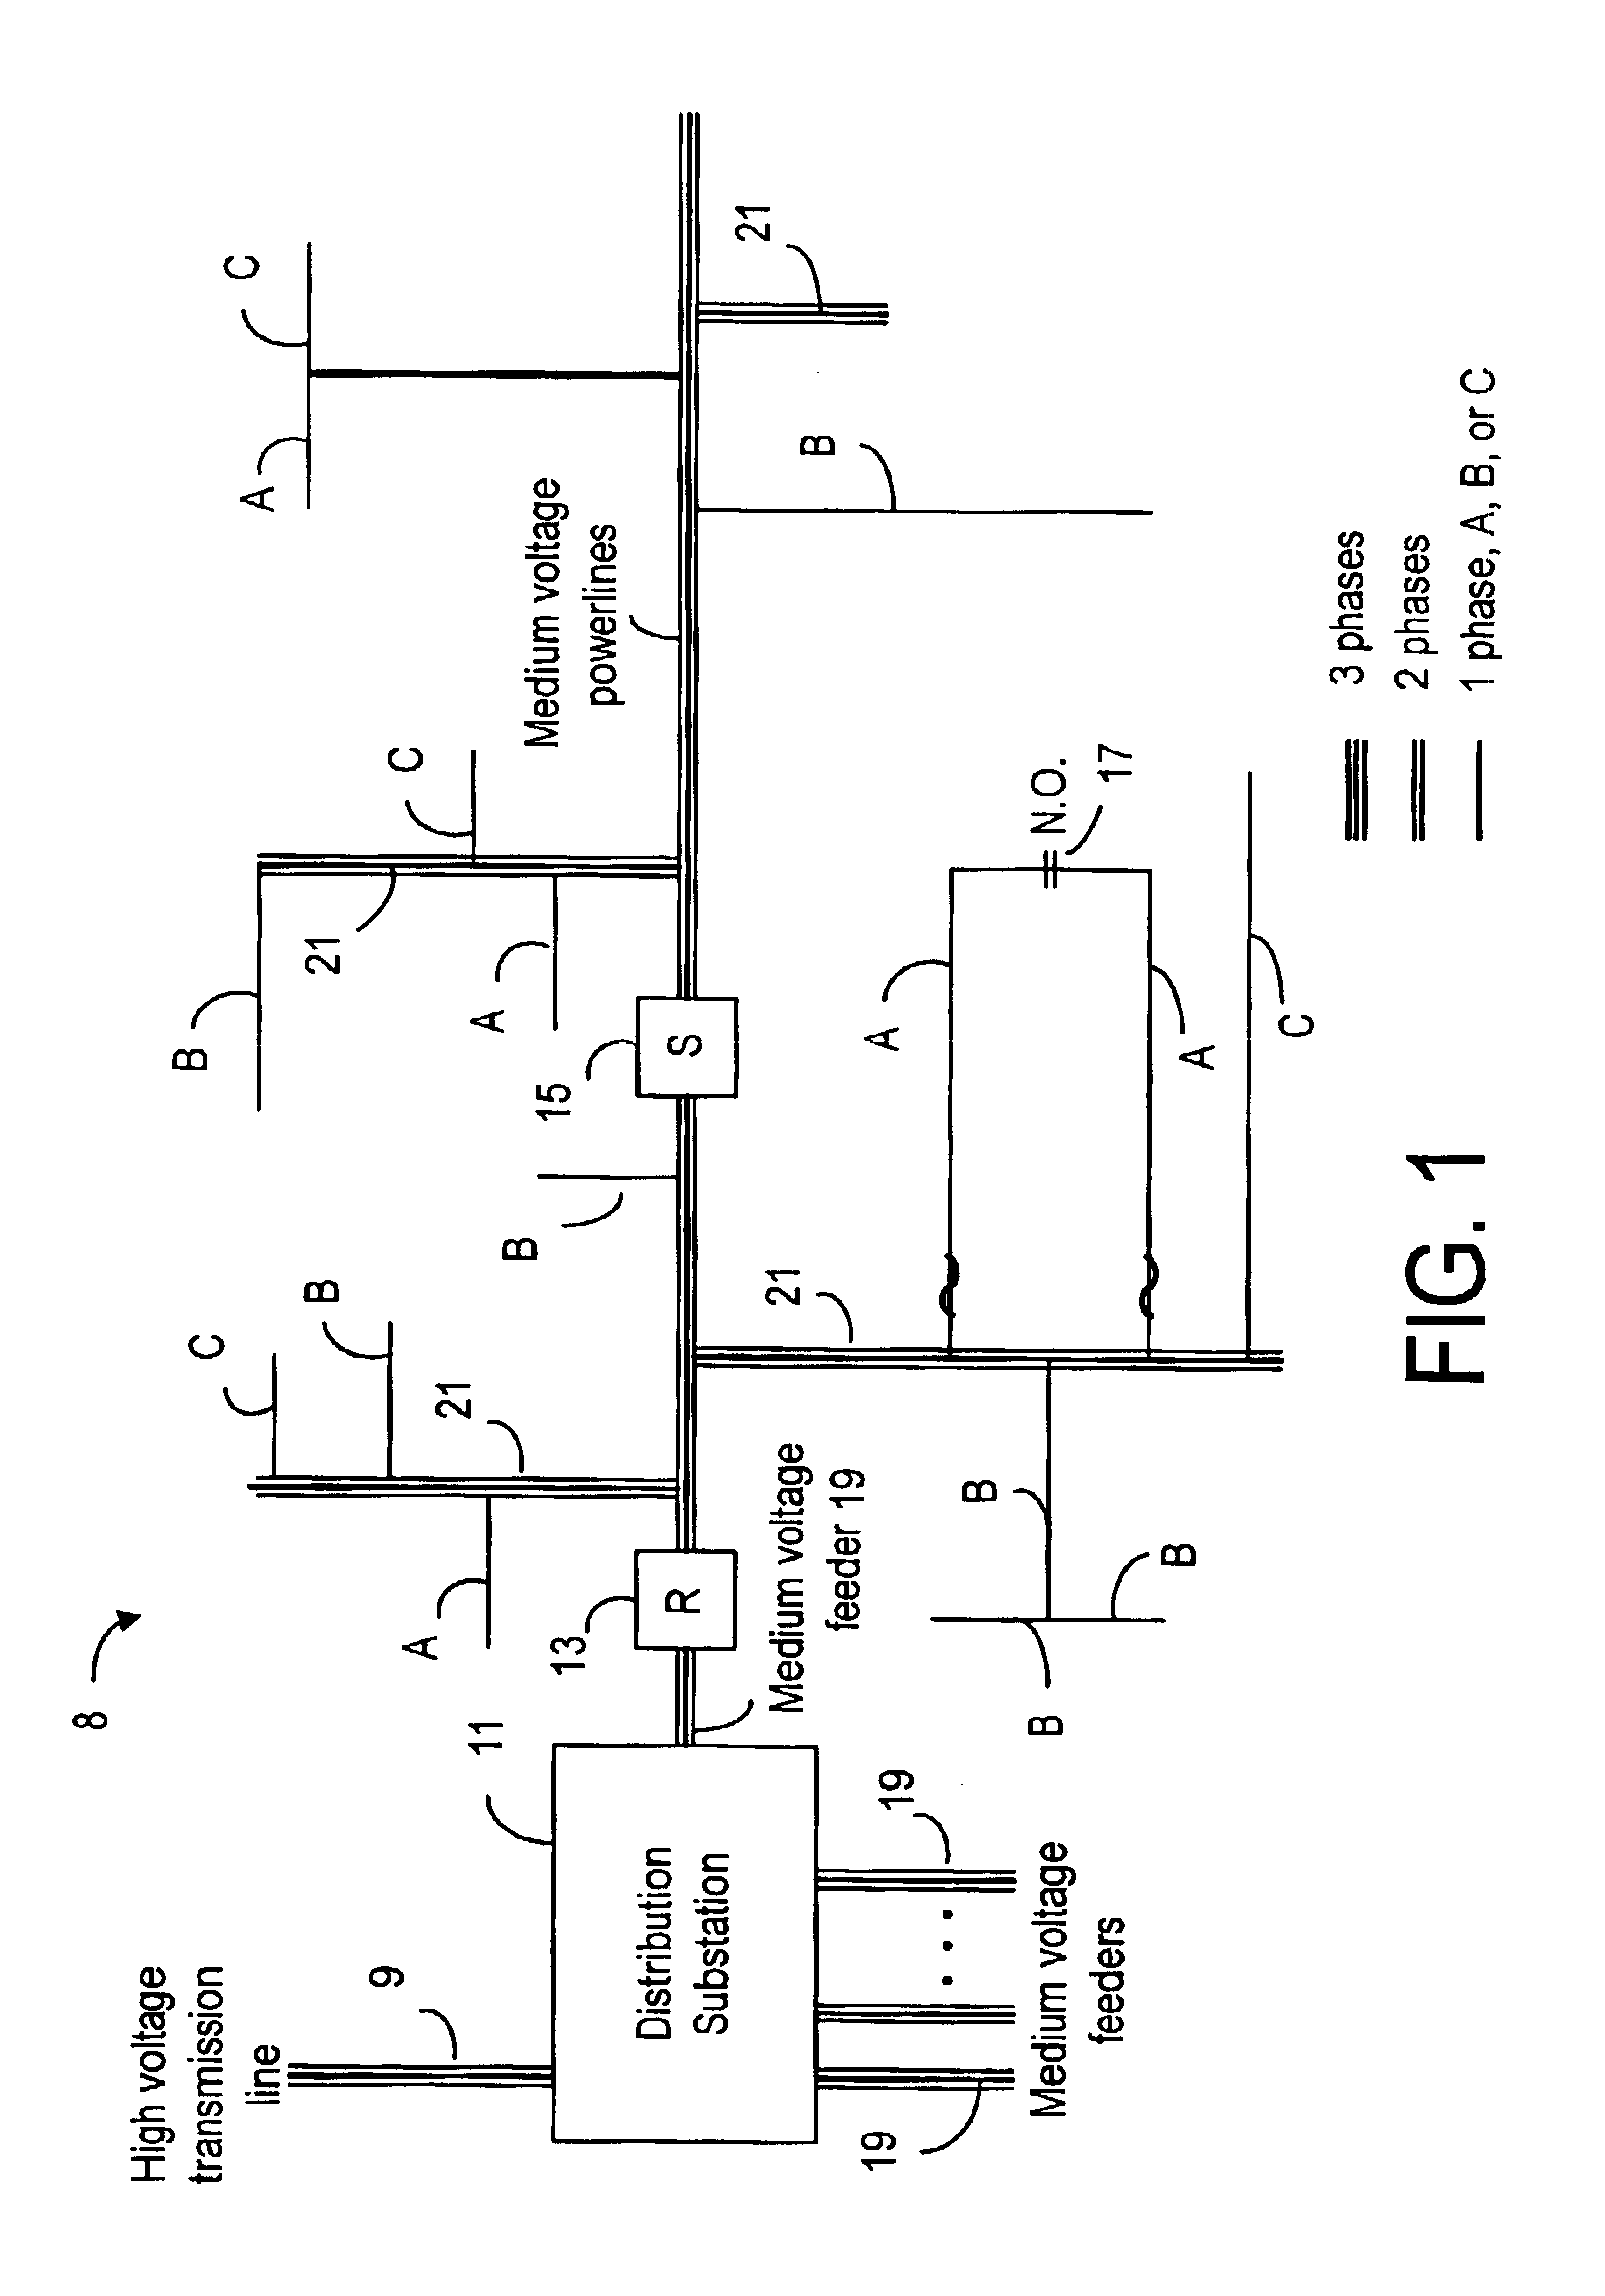 Communications system for providing broadband communications using a medium voltage cable of a power system